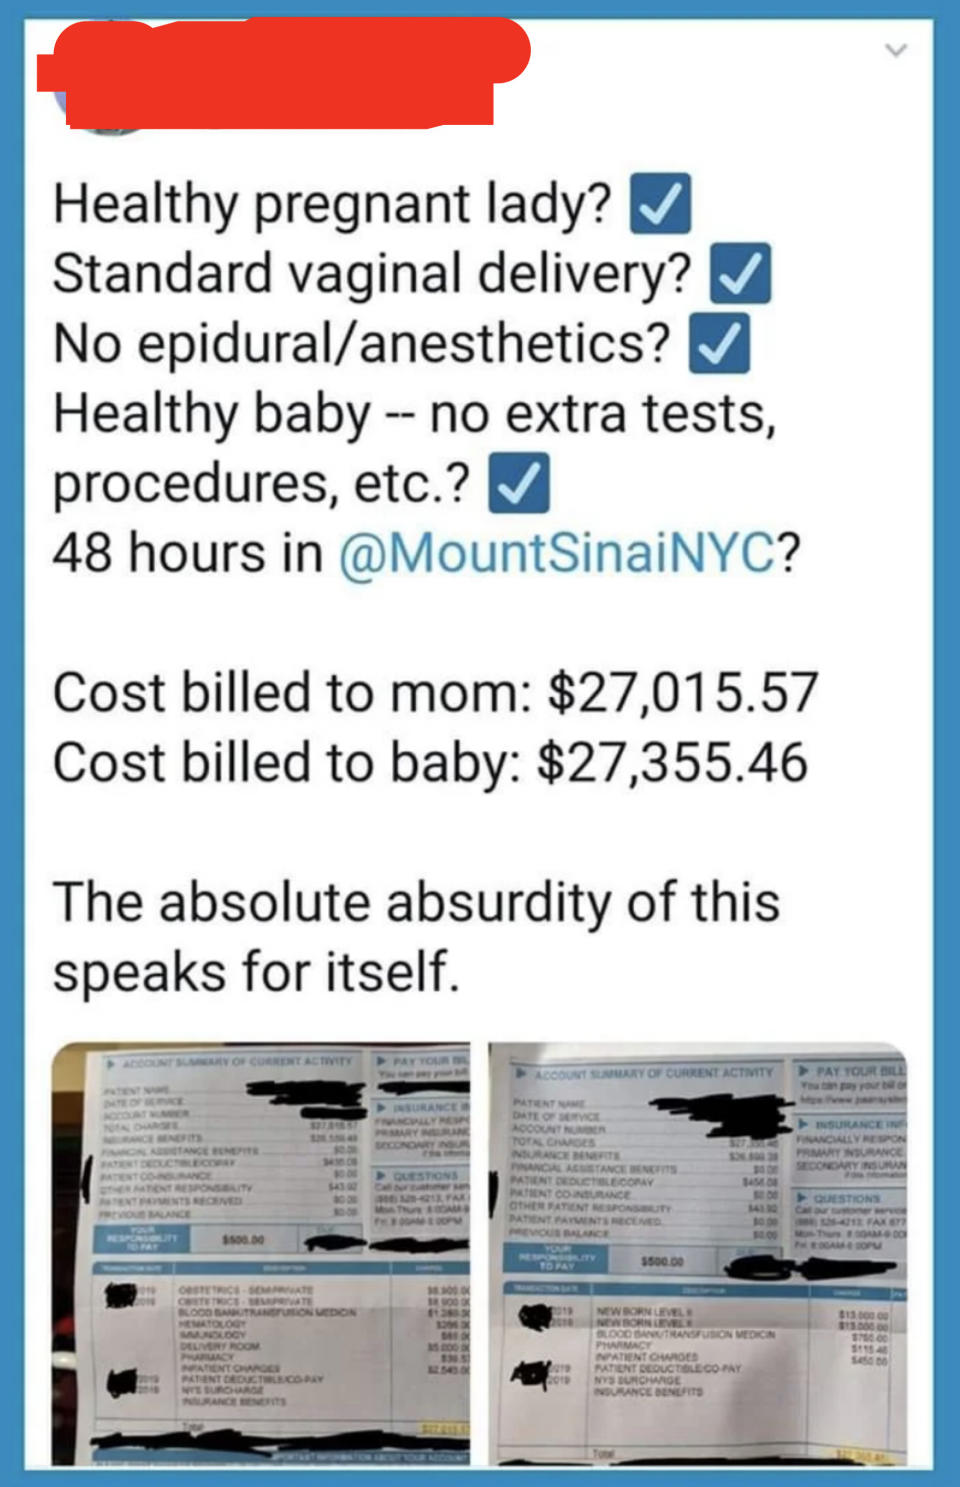 Tweet: "healthy pregnant lady? check; standard vaginal delivery? check; no epidural/anesthetics? check; healthy baby - no extra tests, procedures, etc? check; 48 hours in mt sinai? cost billed to mom: $27k; cost billed to baby: $27k absurd"